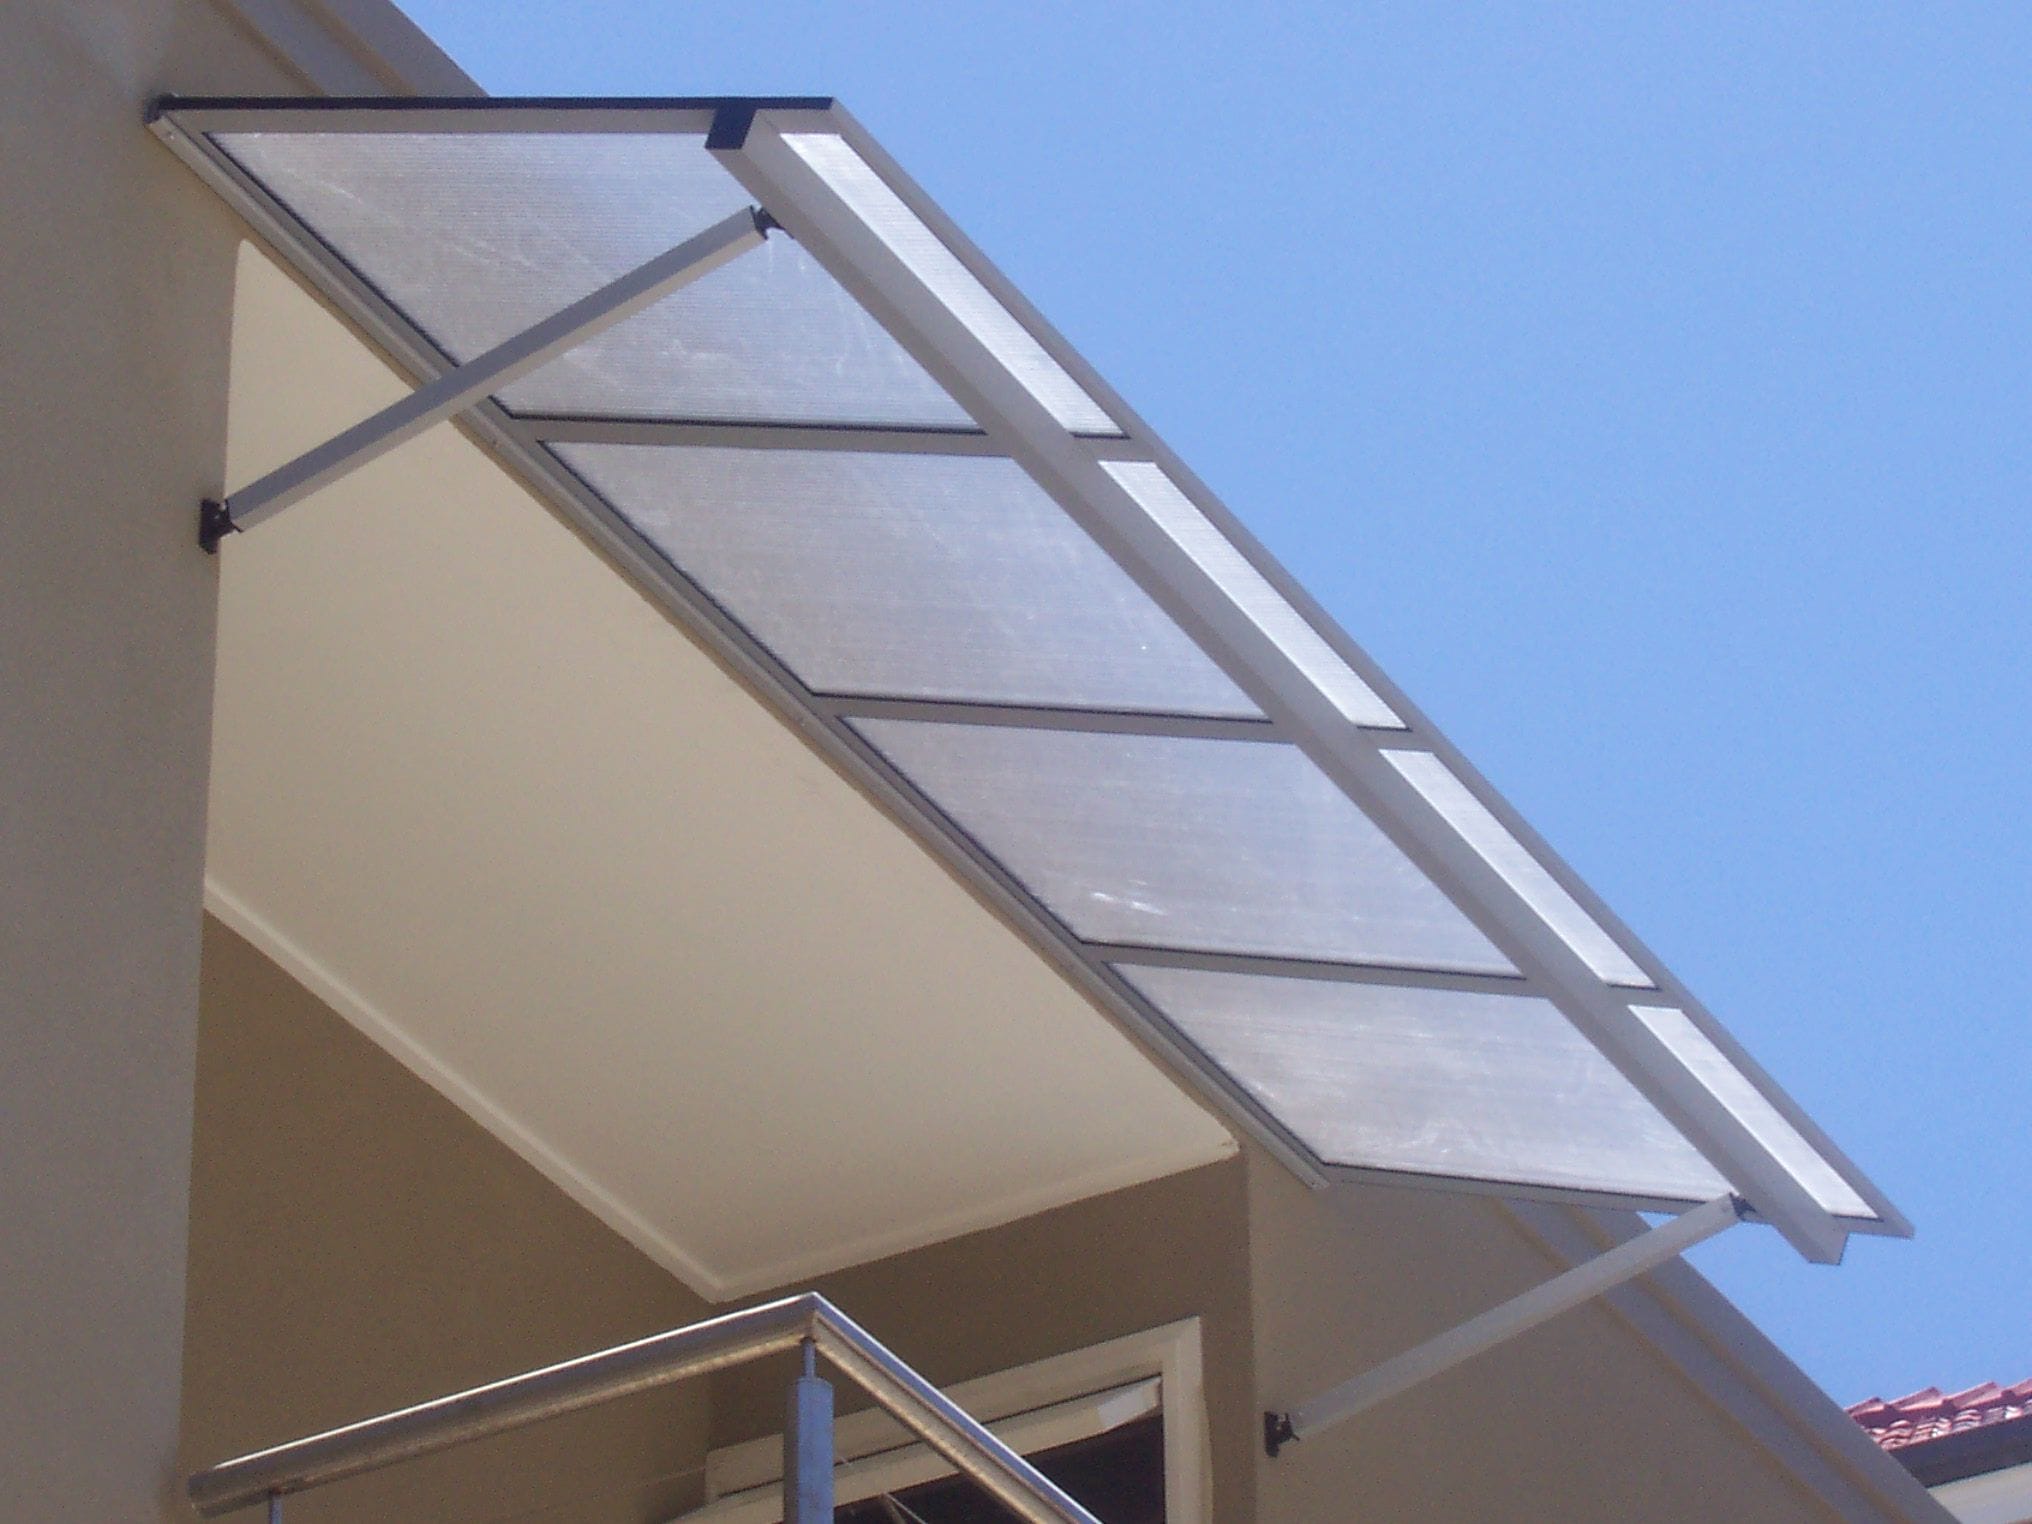 Flat Carbolite Awnings | Premier Shades Central Coast